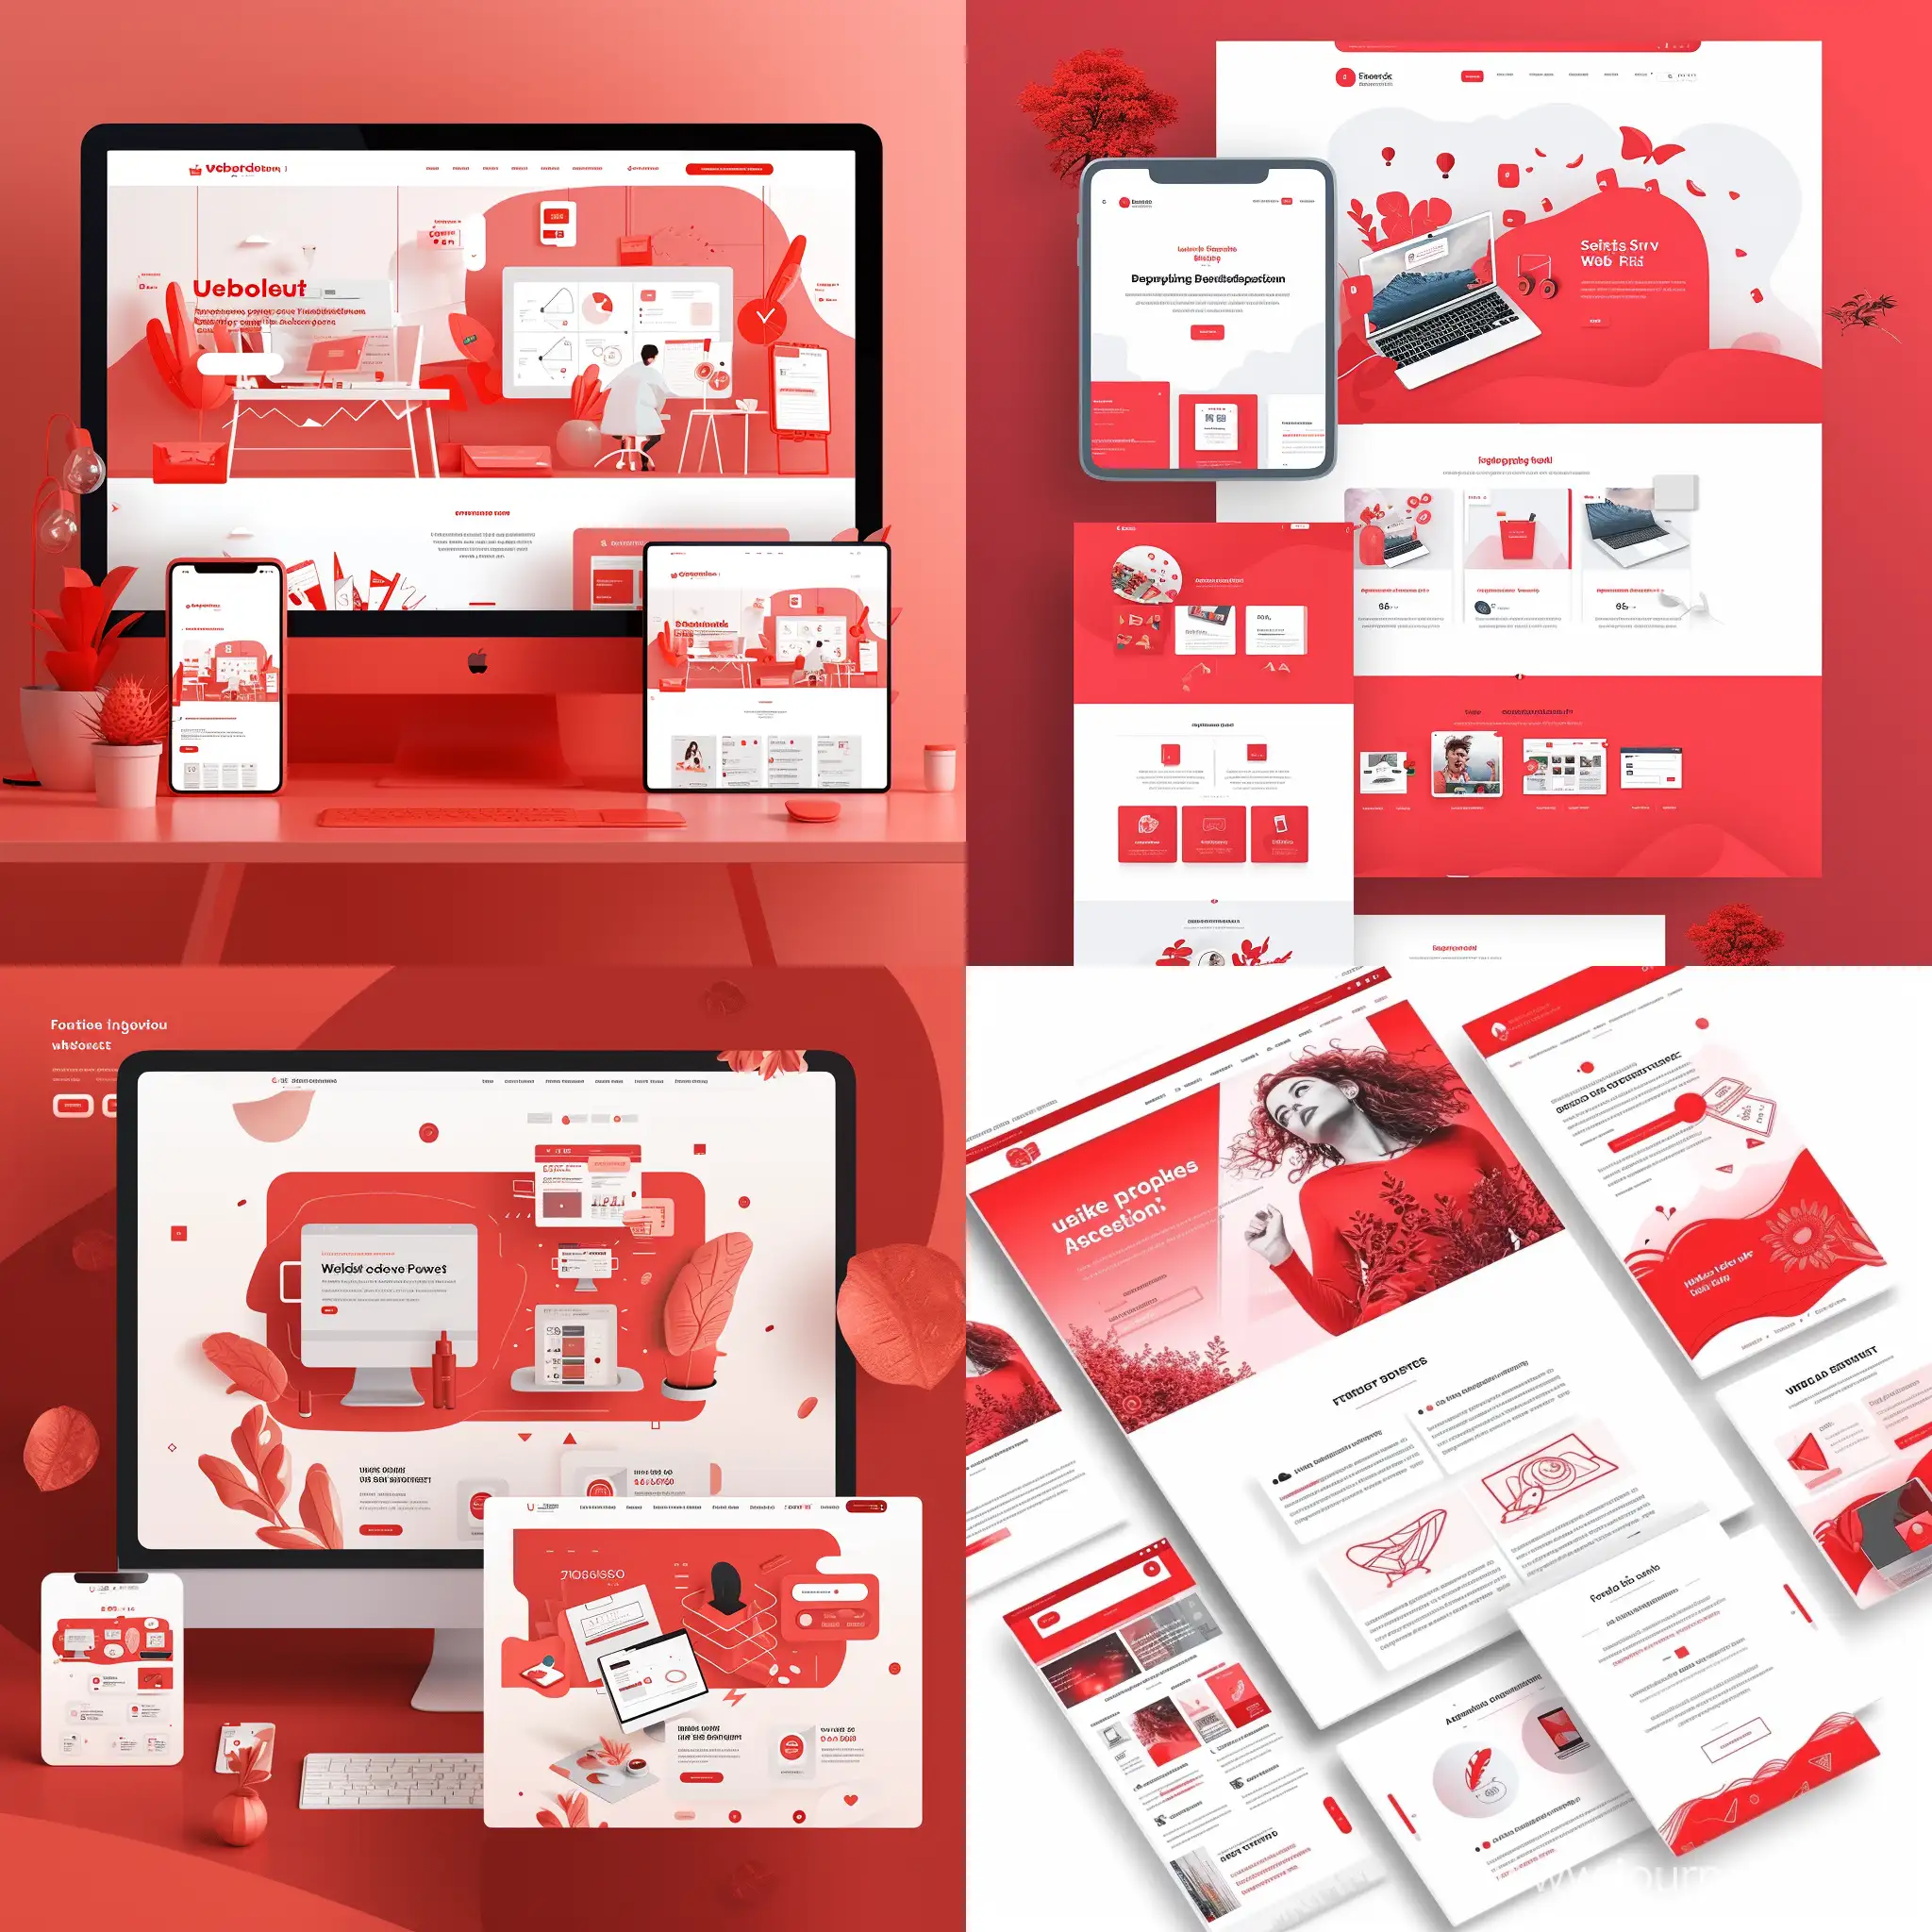 HighQuality-Website-Development-Services-with-Striking-Red-Graphics-and-Illustrations